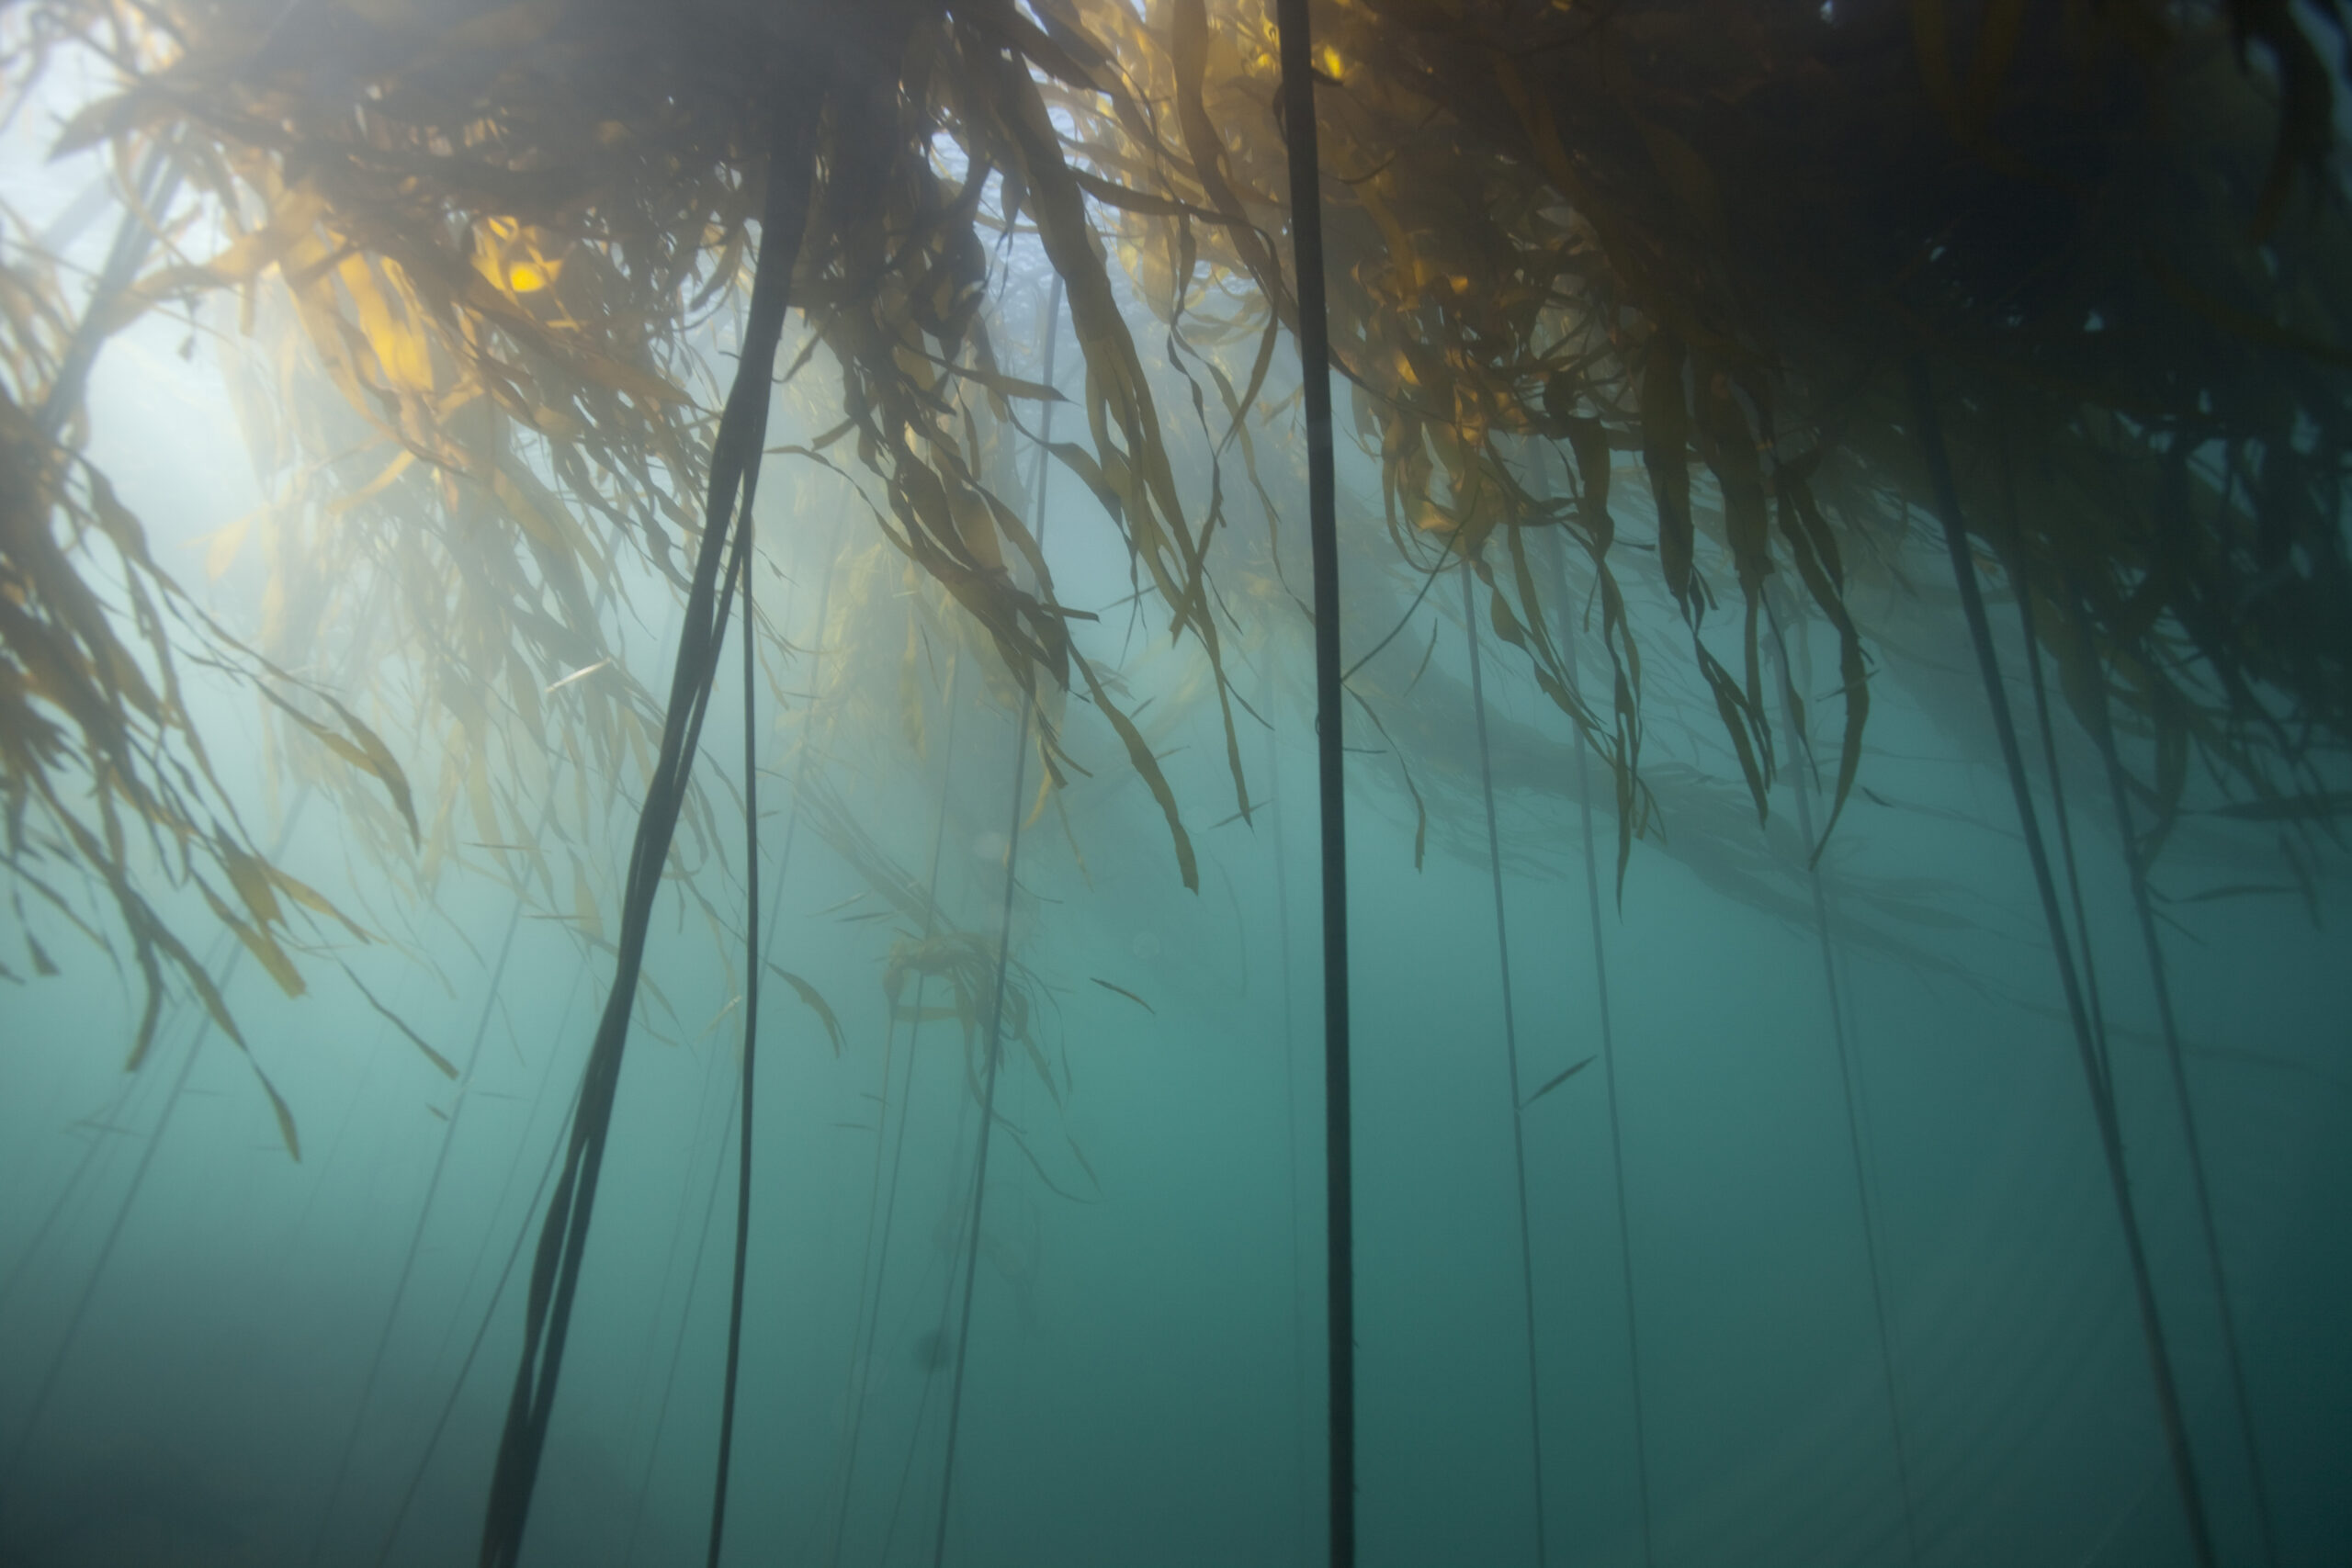 Bull kelp forest seen from ocean floor. The water is greenish blue and the sunlight is trickling in between kelp fronds.